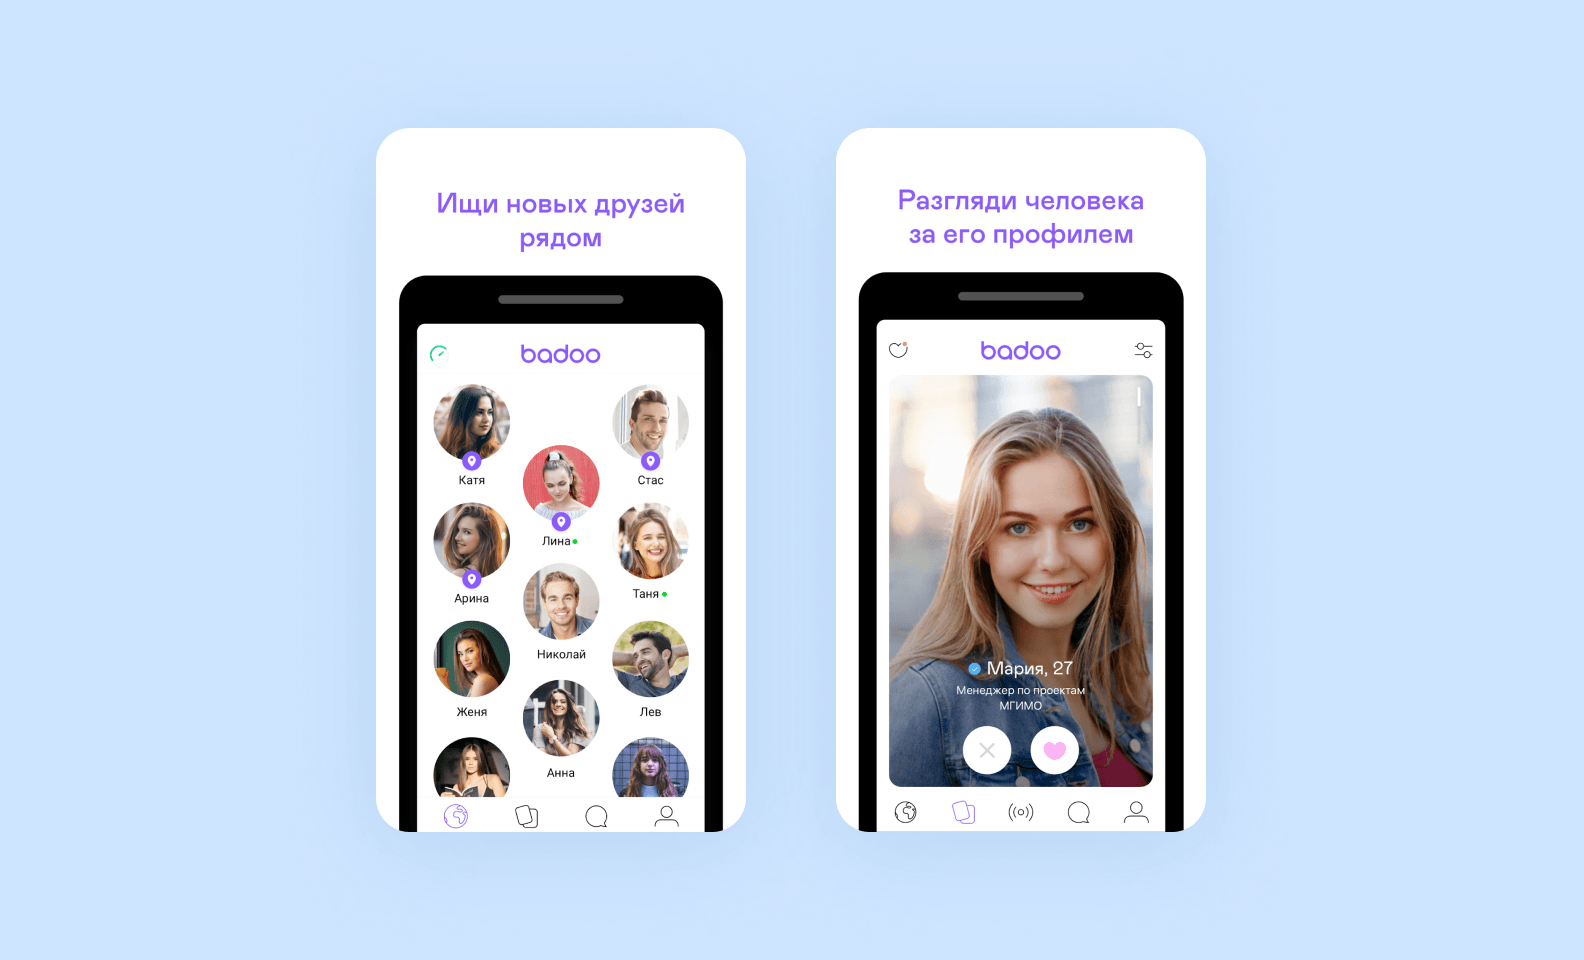 A selection of people nearby and a user profile in Badoo